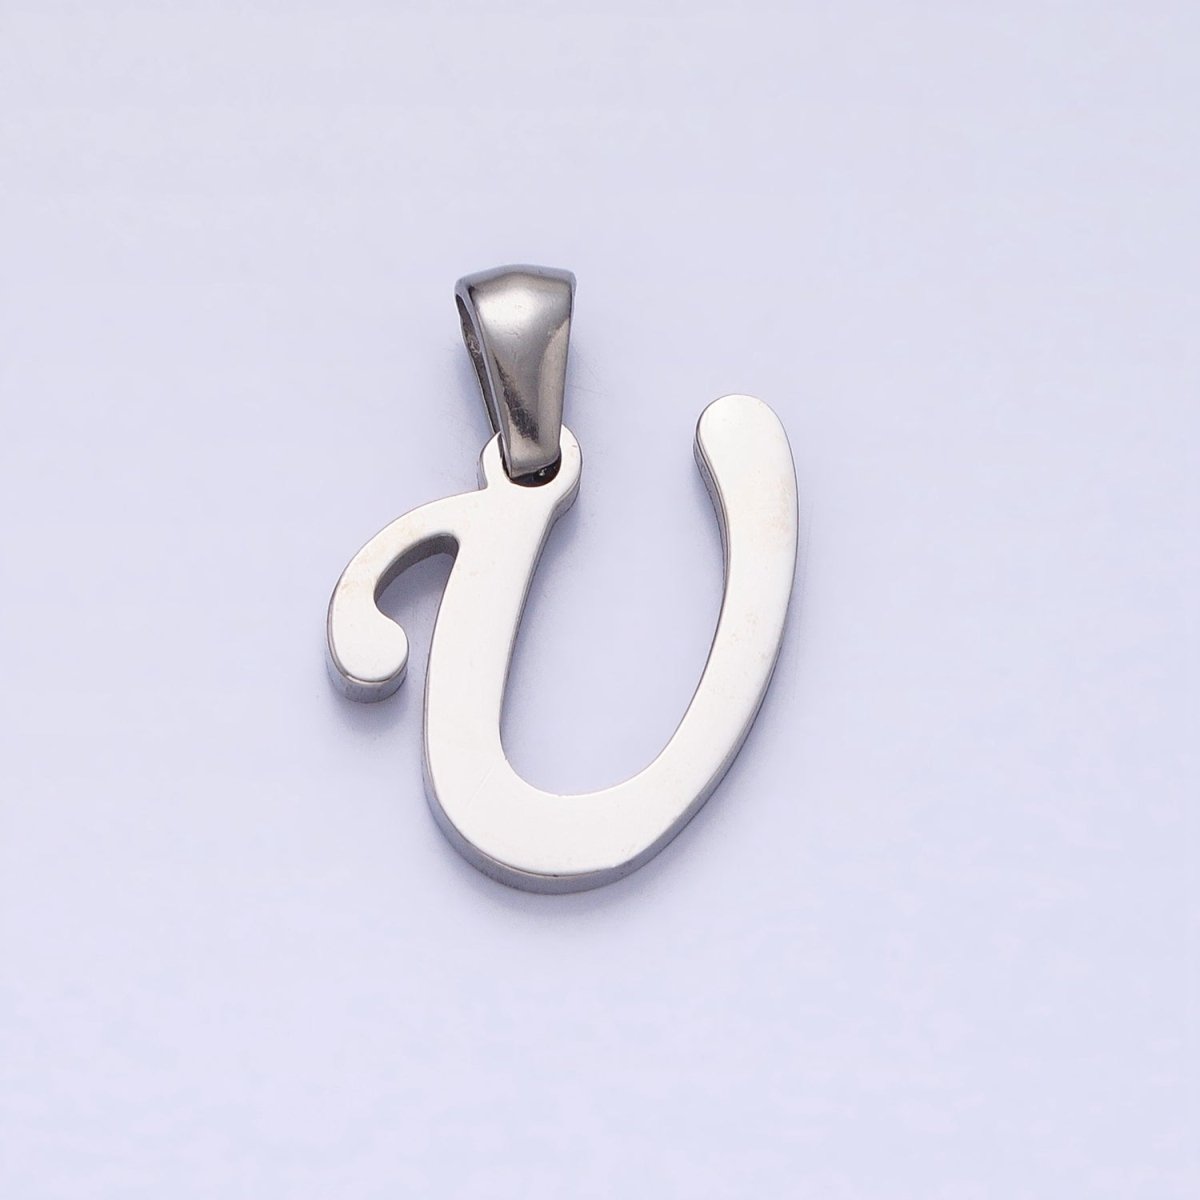 Stainless Steel Letter Charms, initial alphabet pendant DIY jewelry letter charms for personalized jewelry making AD175 - AD200 - DLUXCA